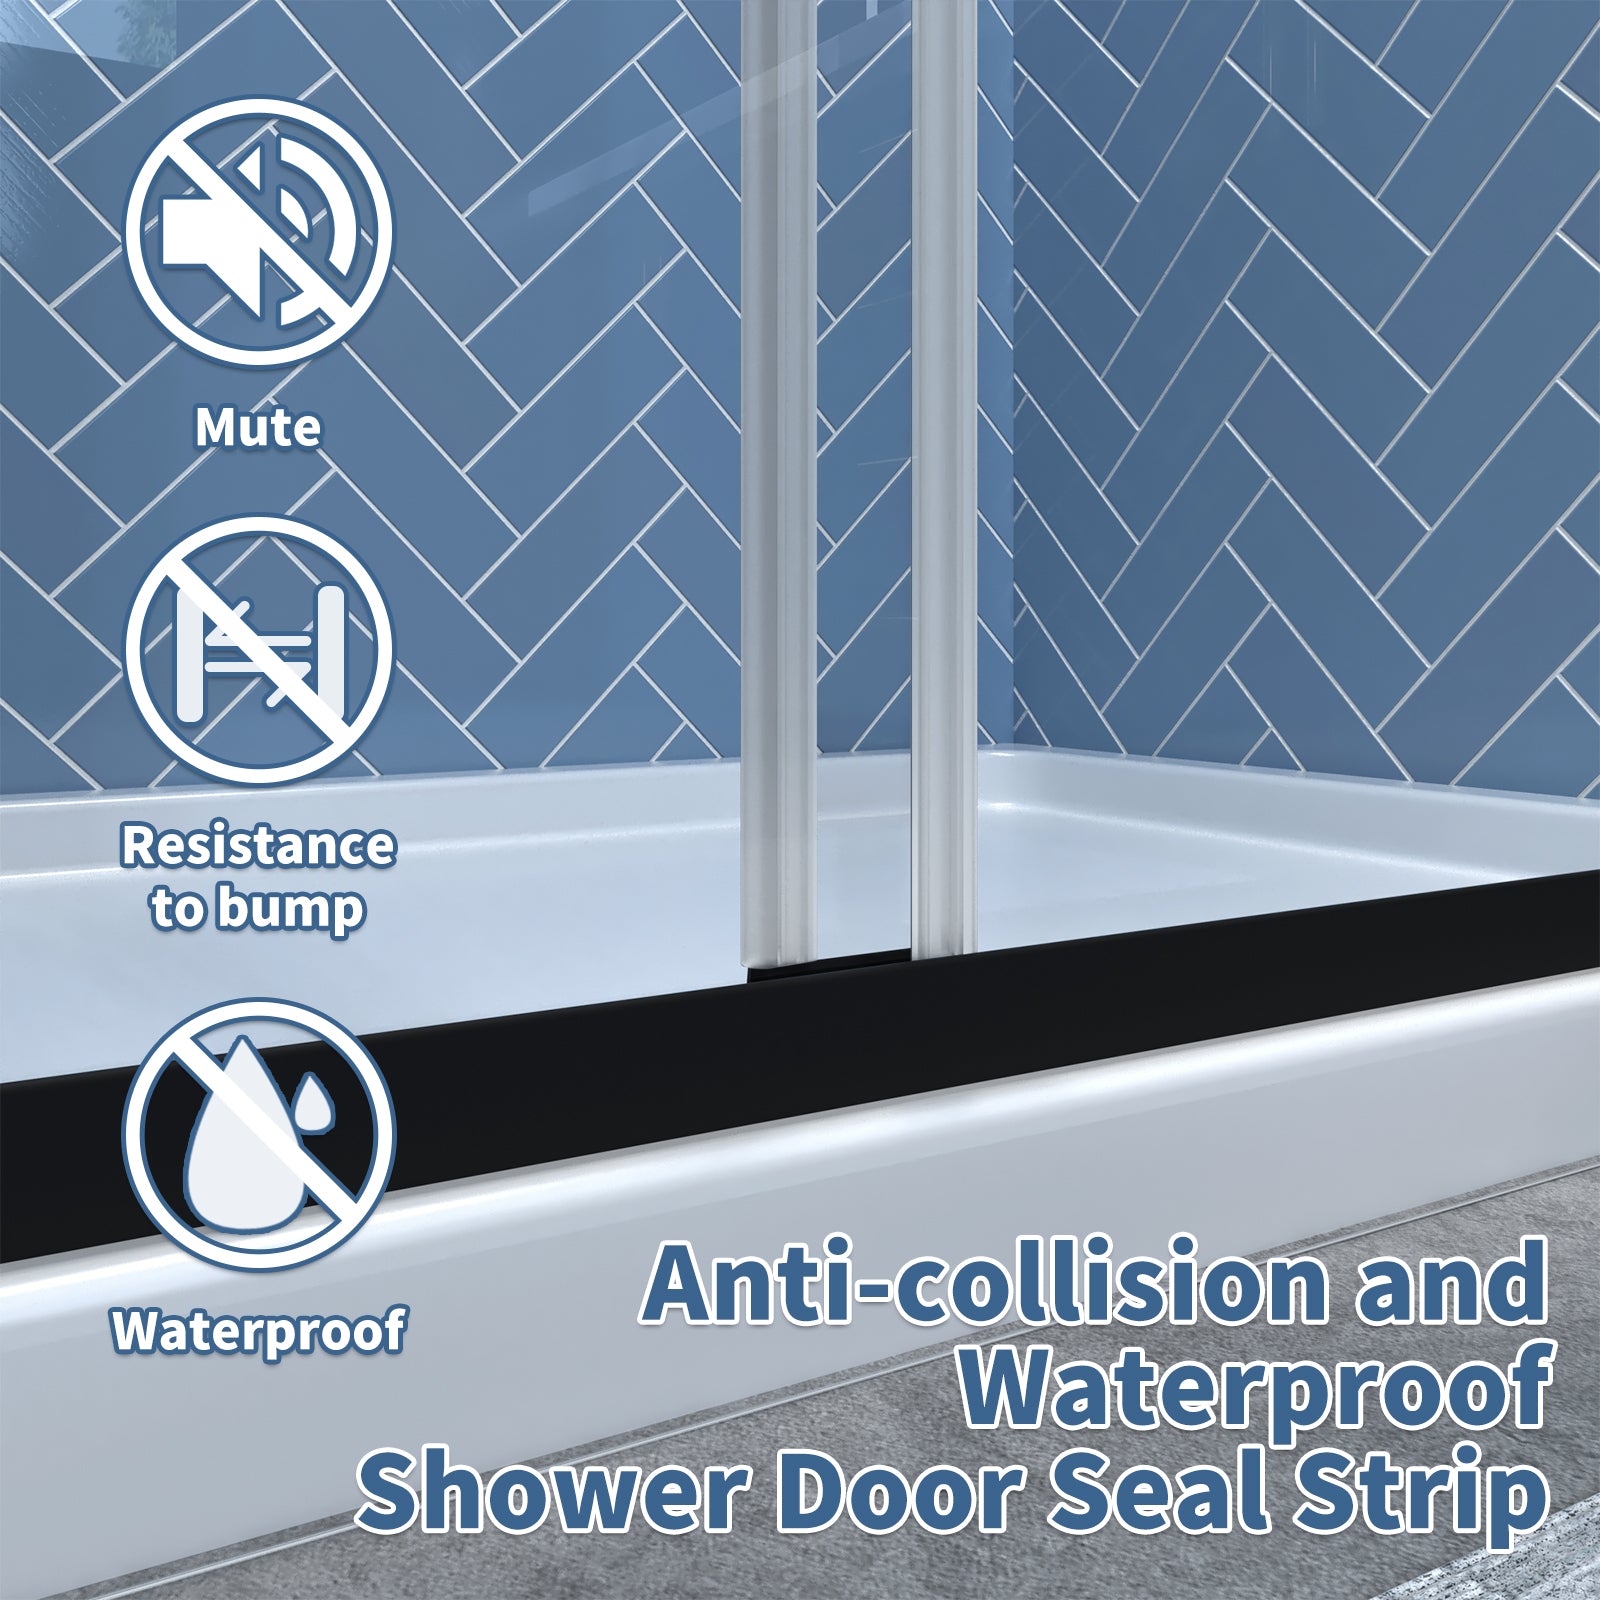 Glide 50-54 in. W x 70 in. H Sliding Glass Shower Doors Frame in Black,Clear Tempered Glass